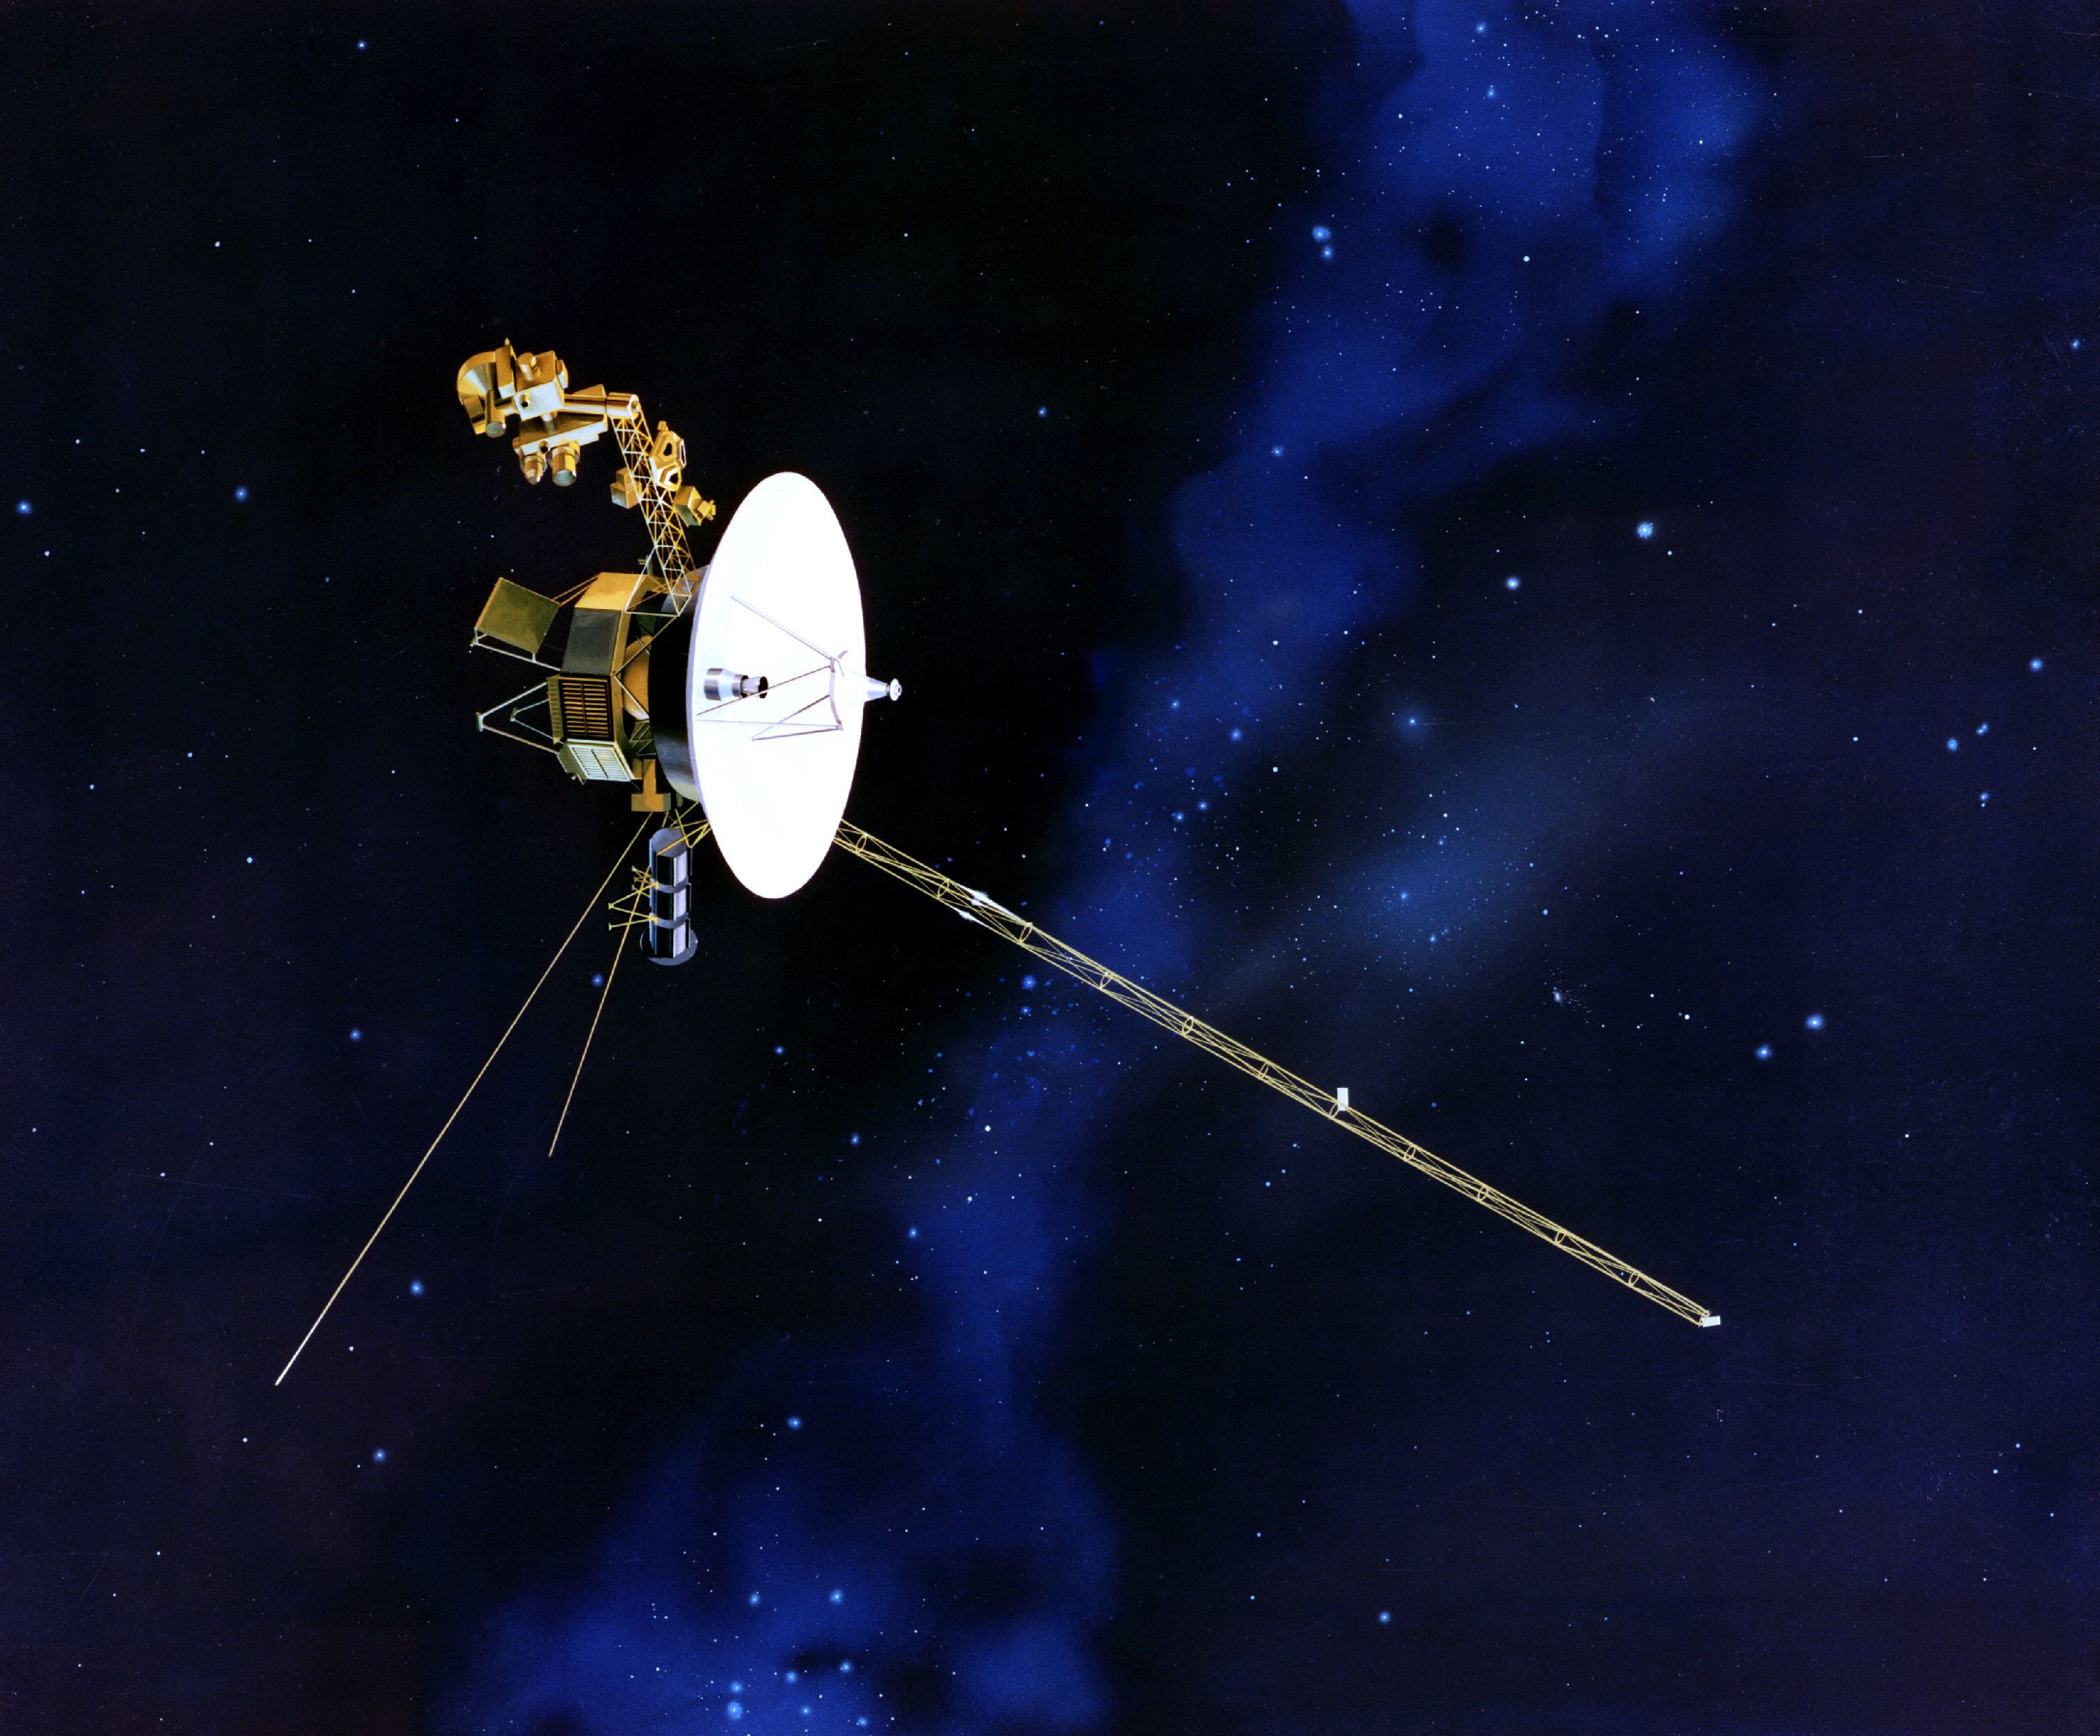 space voyager 1 in pictures